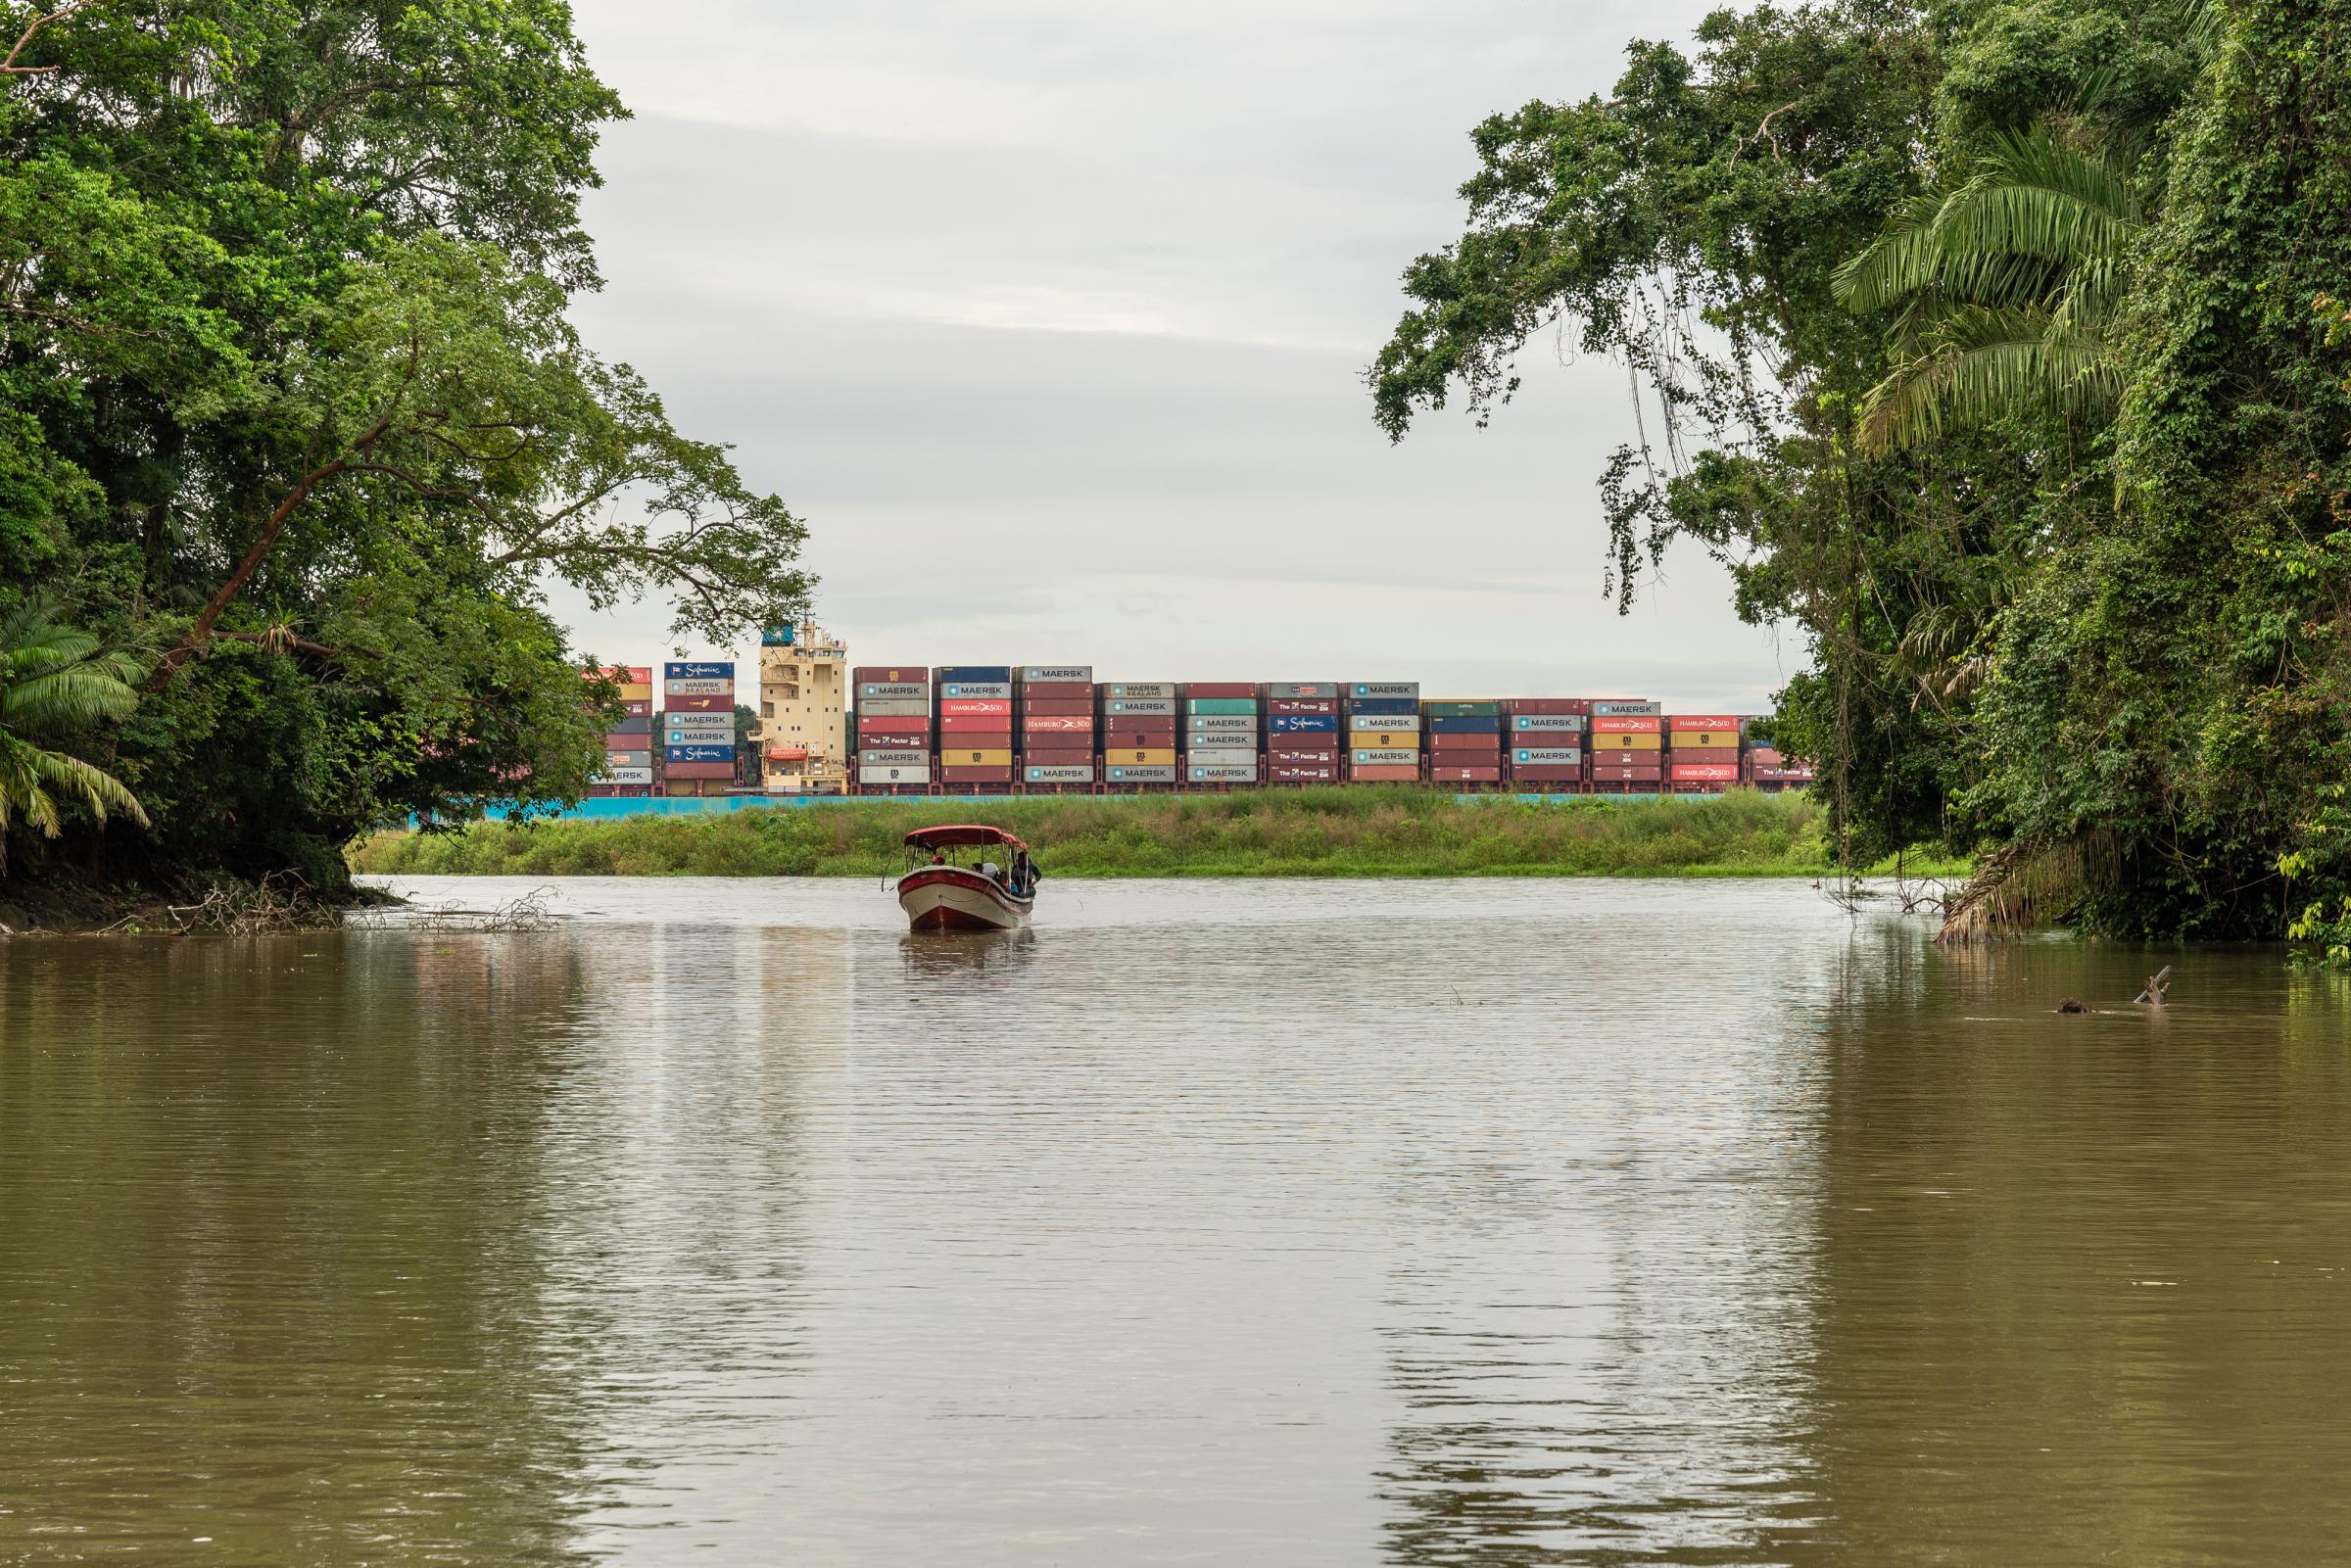 Bloomberg: Saving the Panama Canal Will Take Years and Cost Billions, If It’s Even Possible - Cargo ships cross behind a piece of tall grass at Gatún Lake, Colon, on Monday, Nov. 20, 2023...